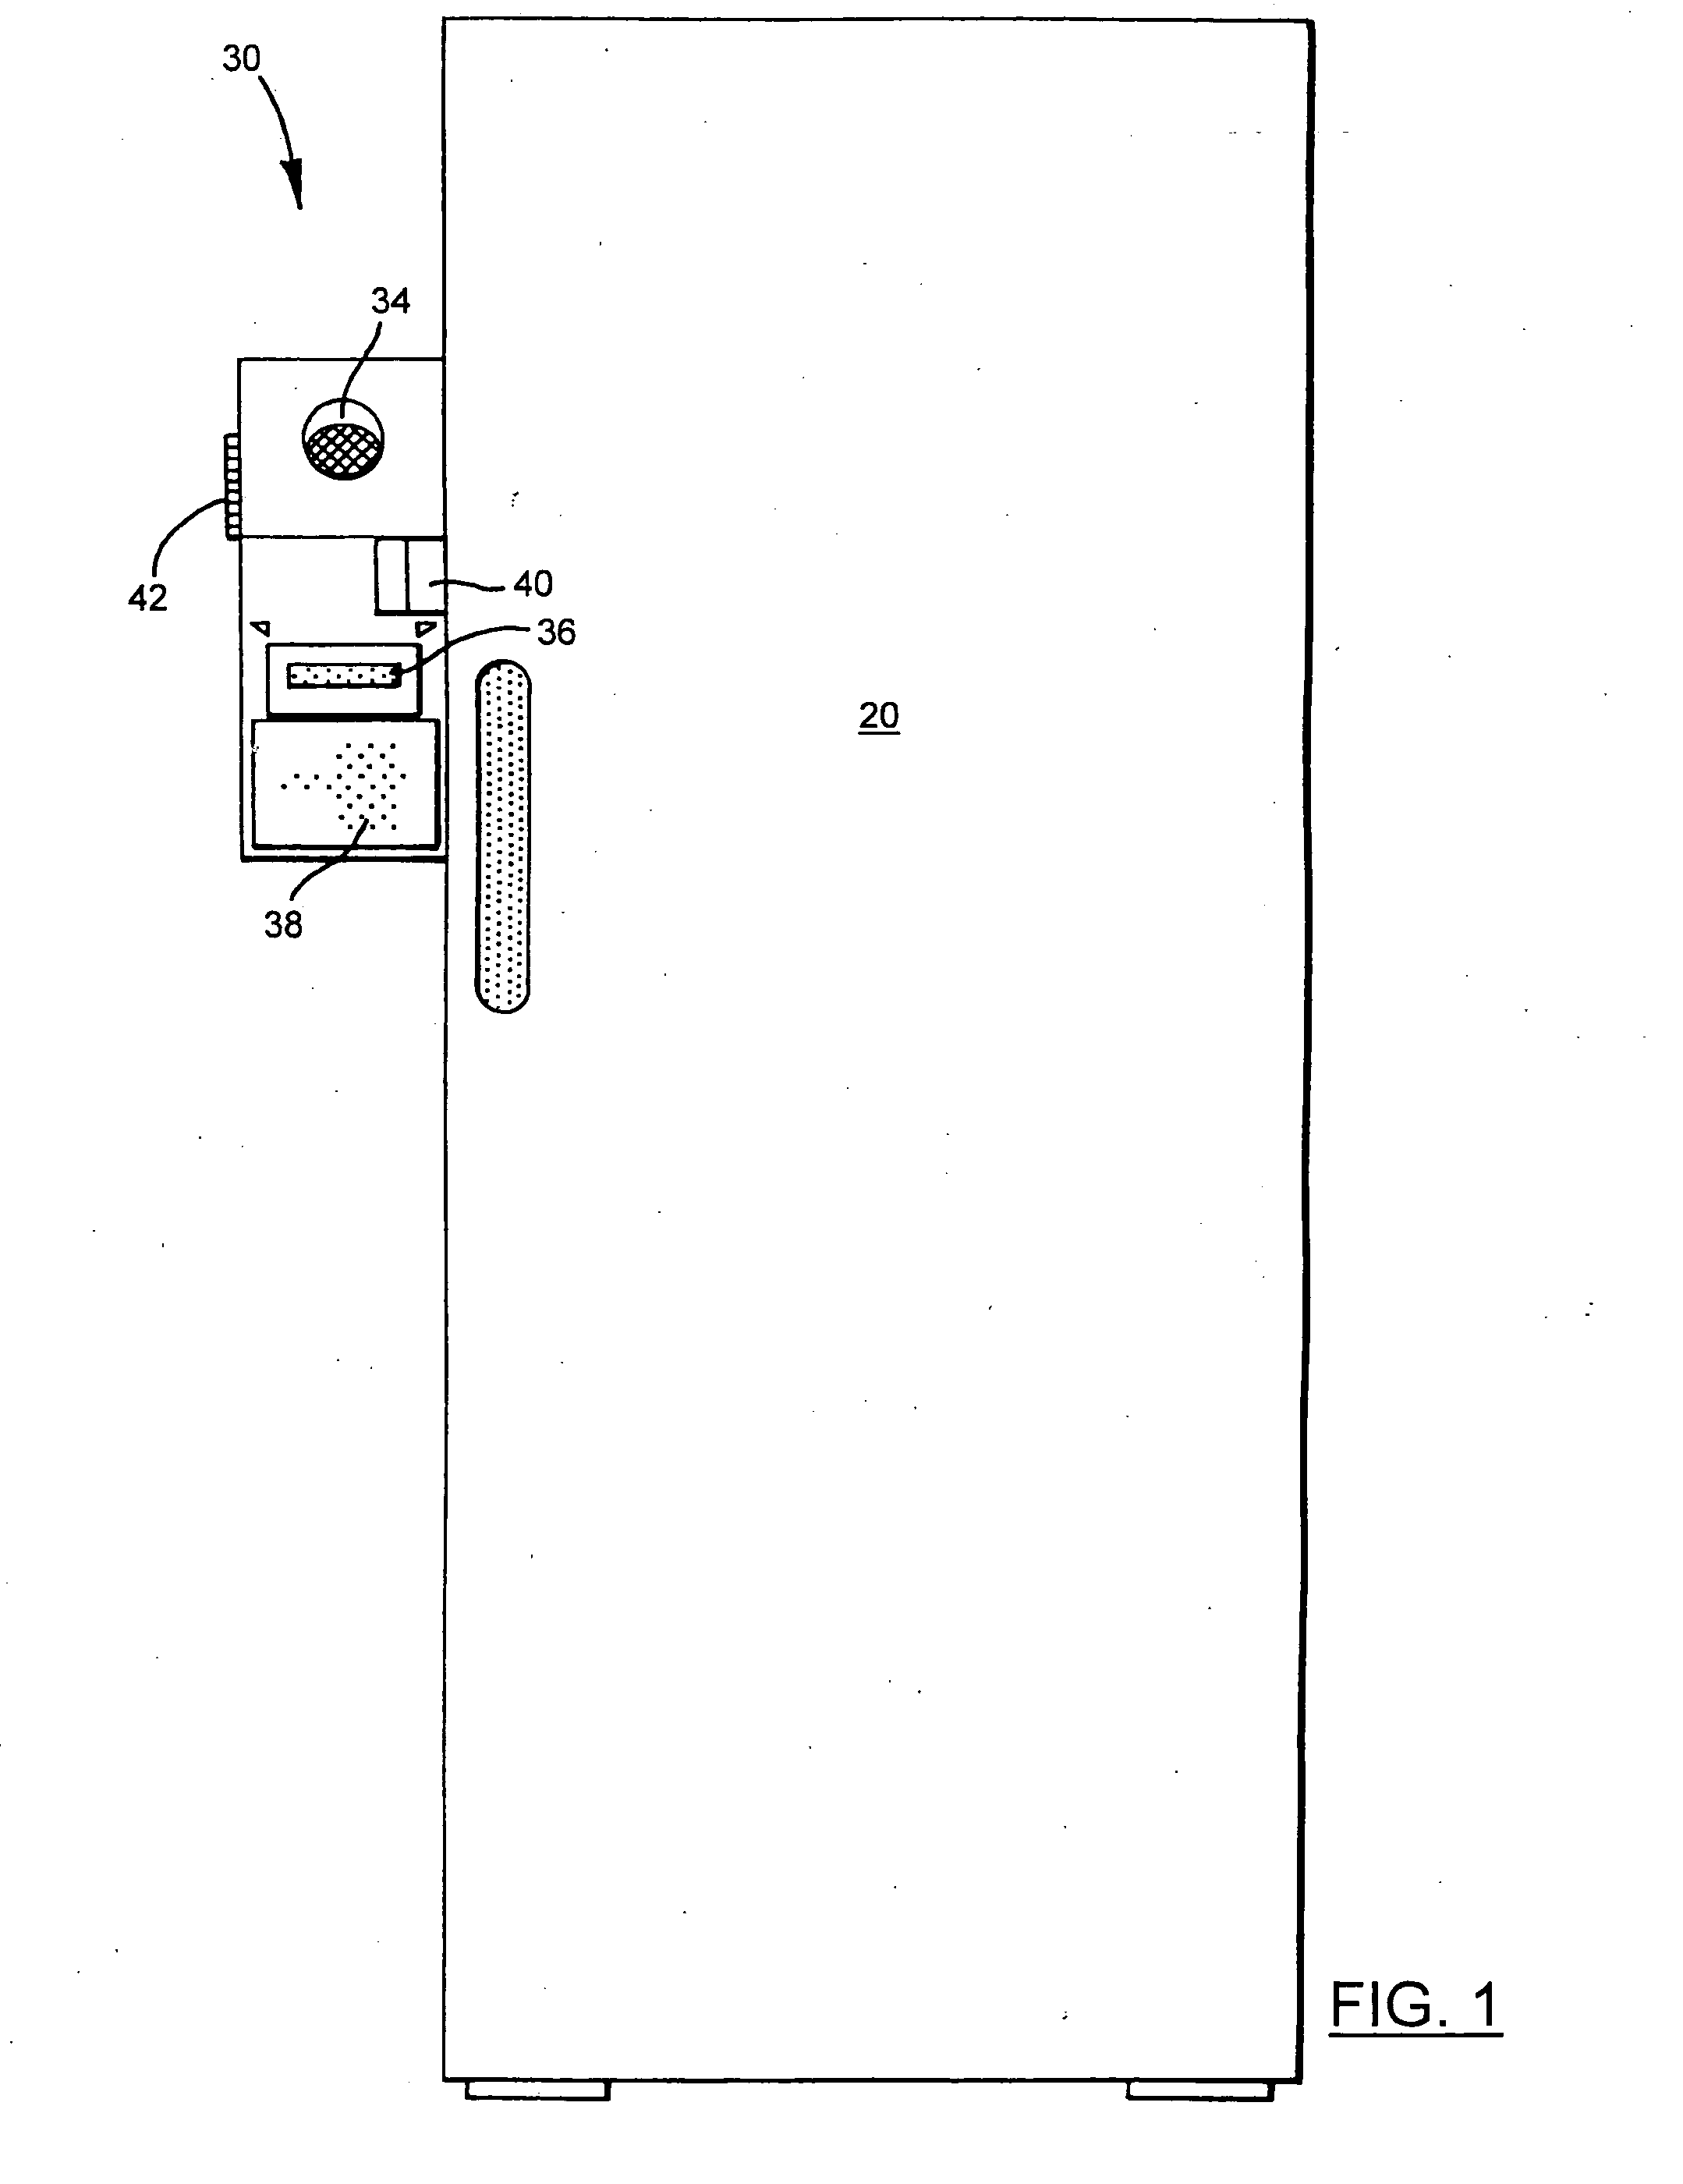 System and method for tracking inventory